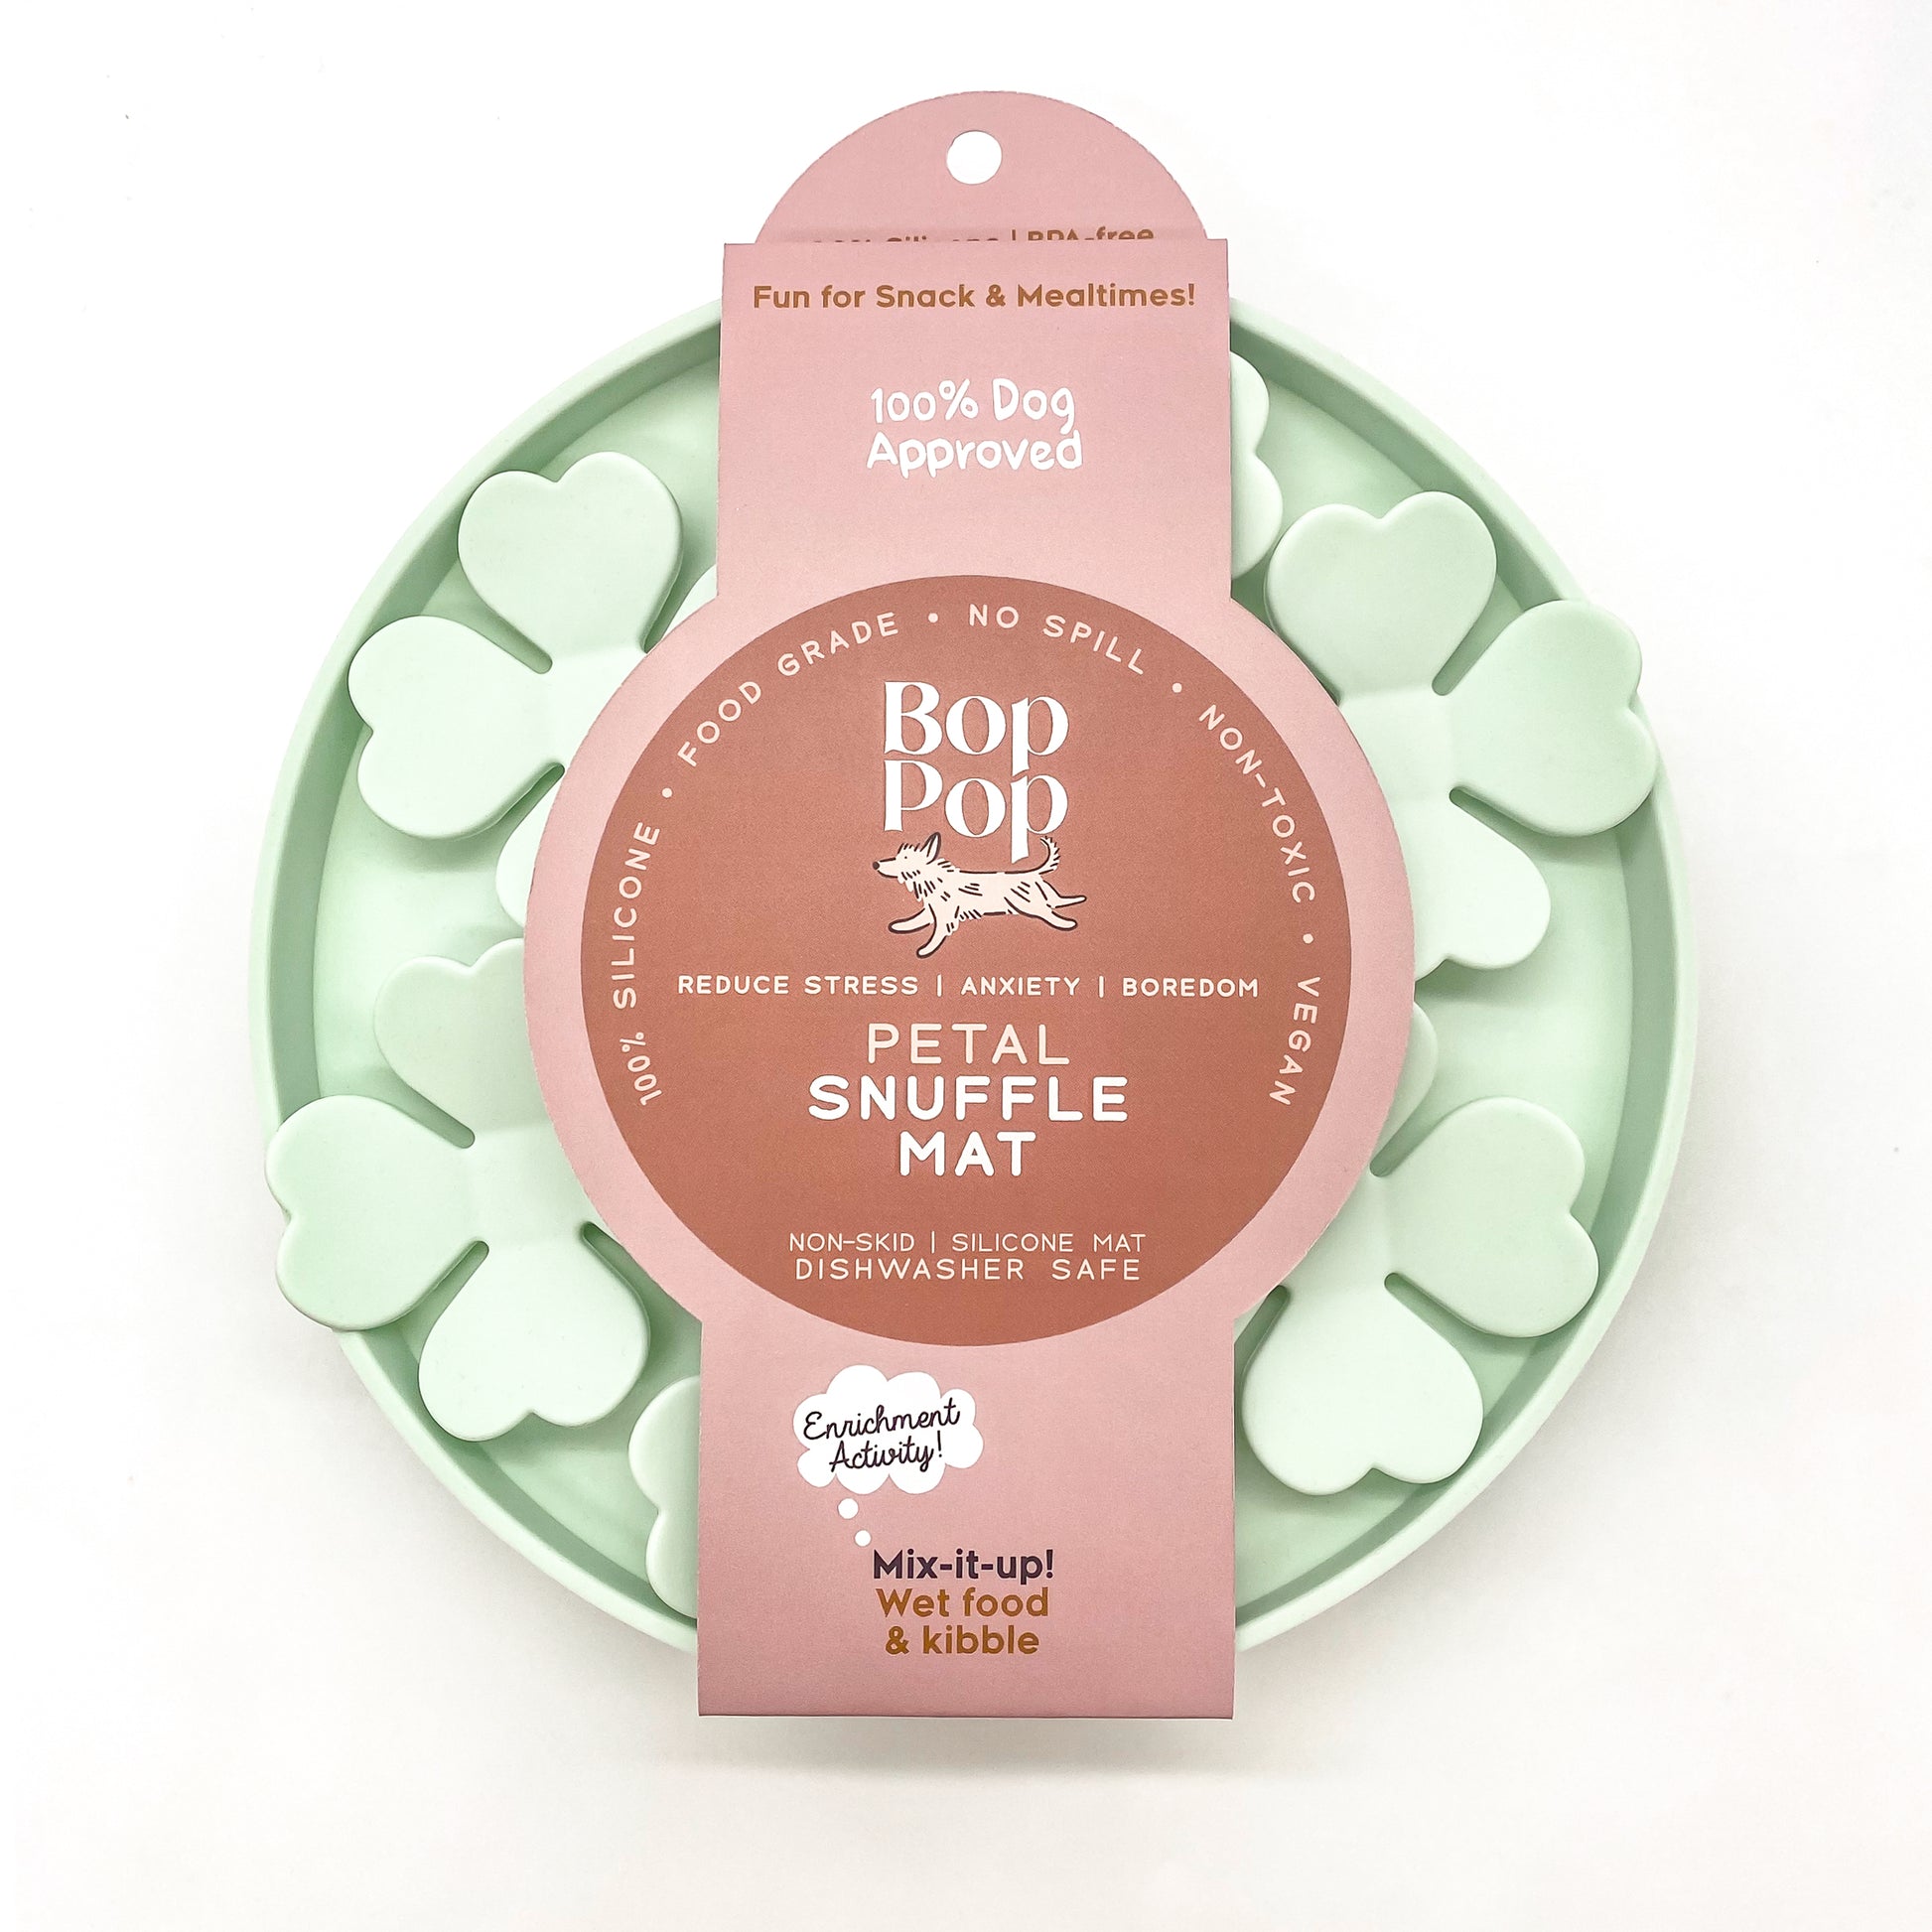 Snuffle Mat Clover Mint Pastel Green Silicone BPA Free slow feeder dog cat pet bowl mealtime enrichment anti-anxiety feeder Bop Pop Pets packaging